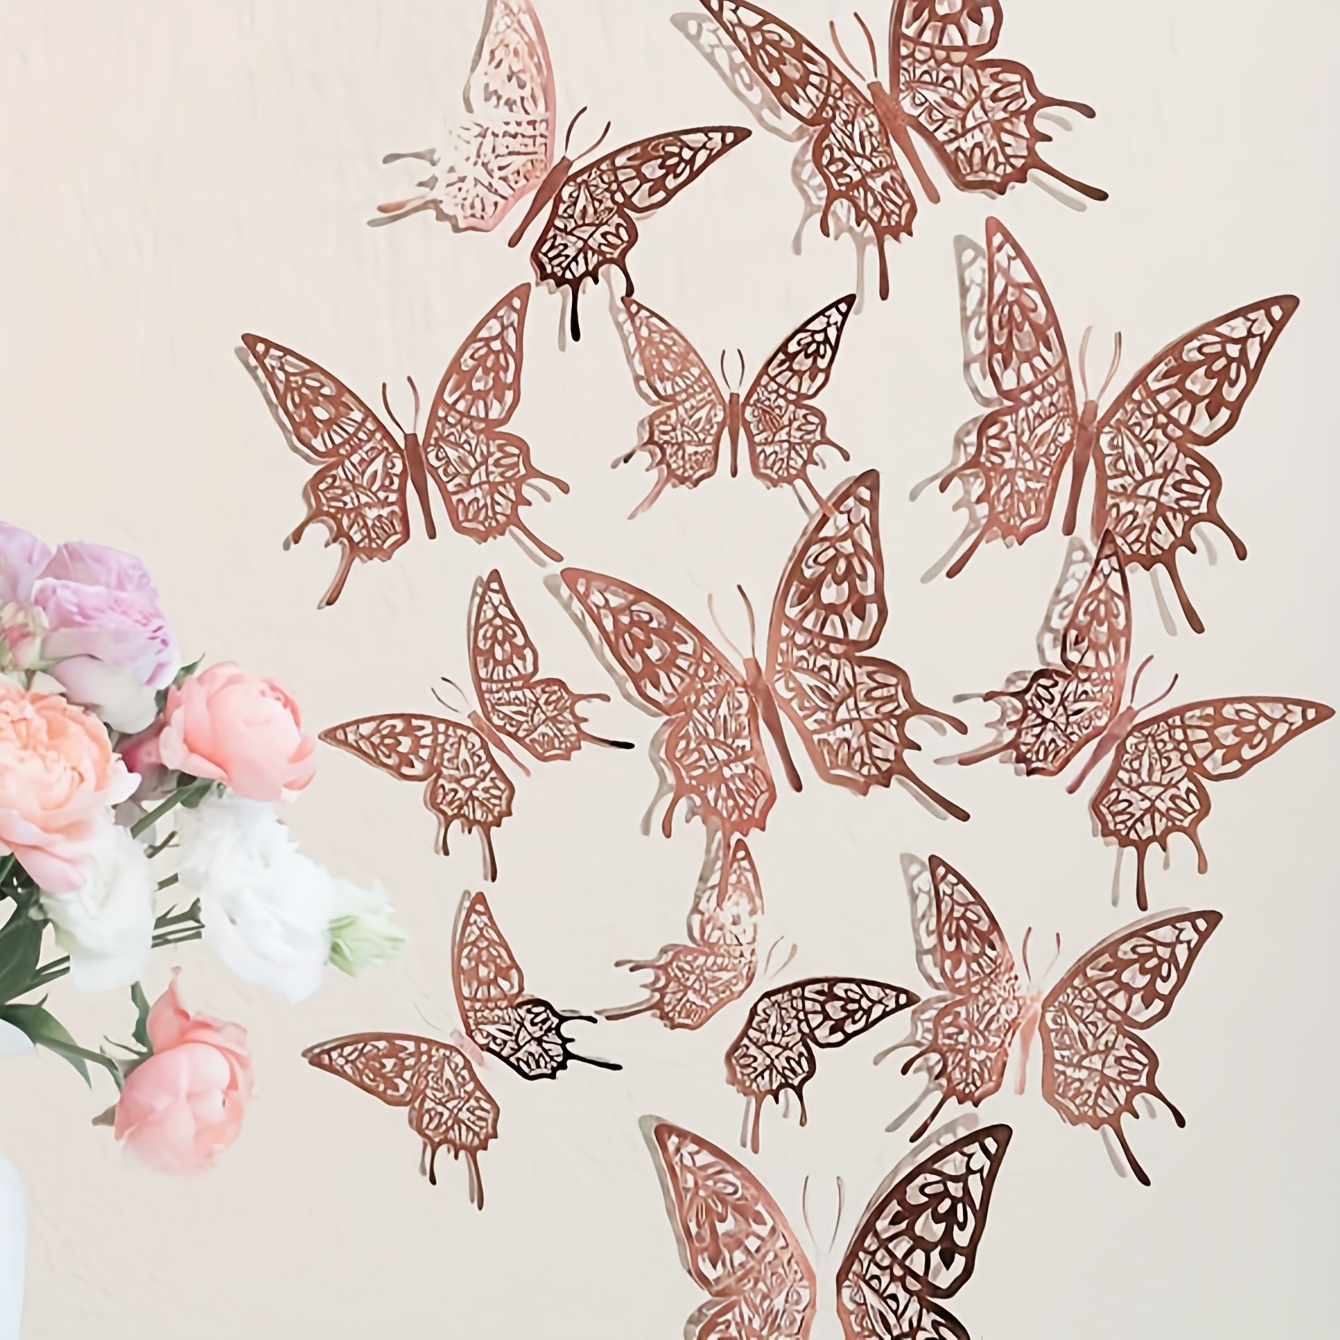 12 Pack 3D Rose Gold Butterfly Wall Decals Diy Removable Mural